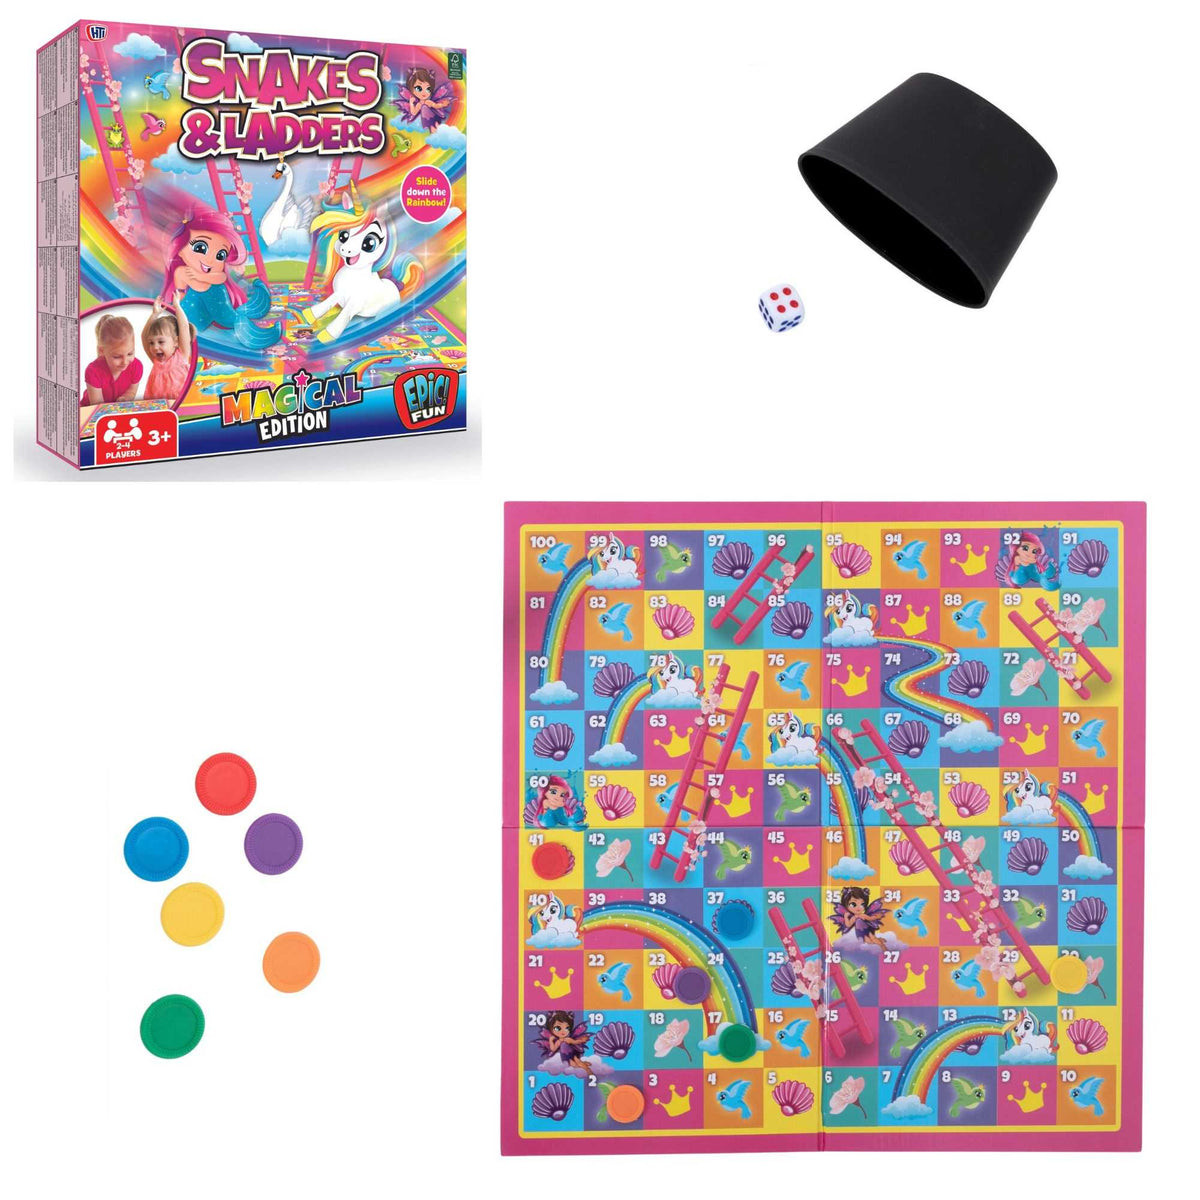 Snakes and Ladders Board Game - Magical Edition